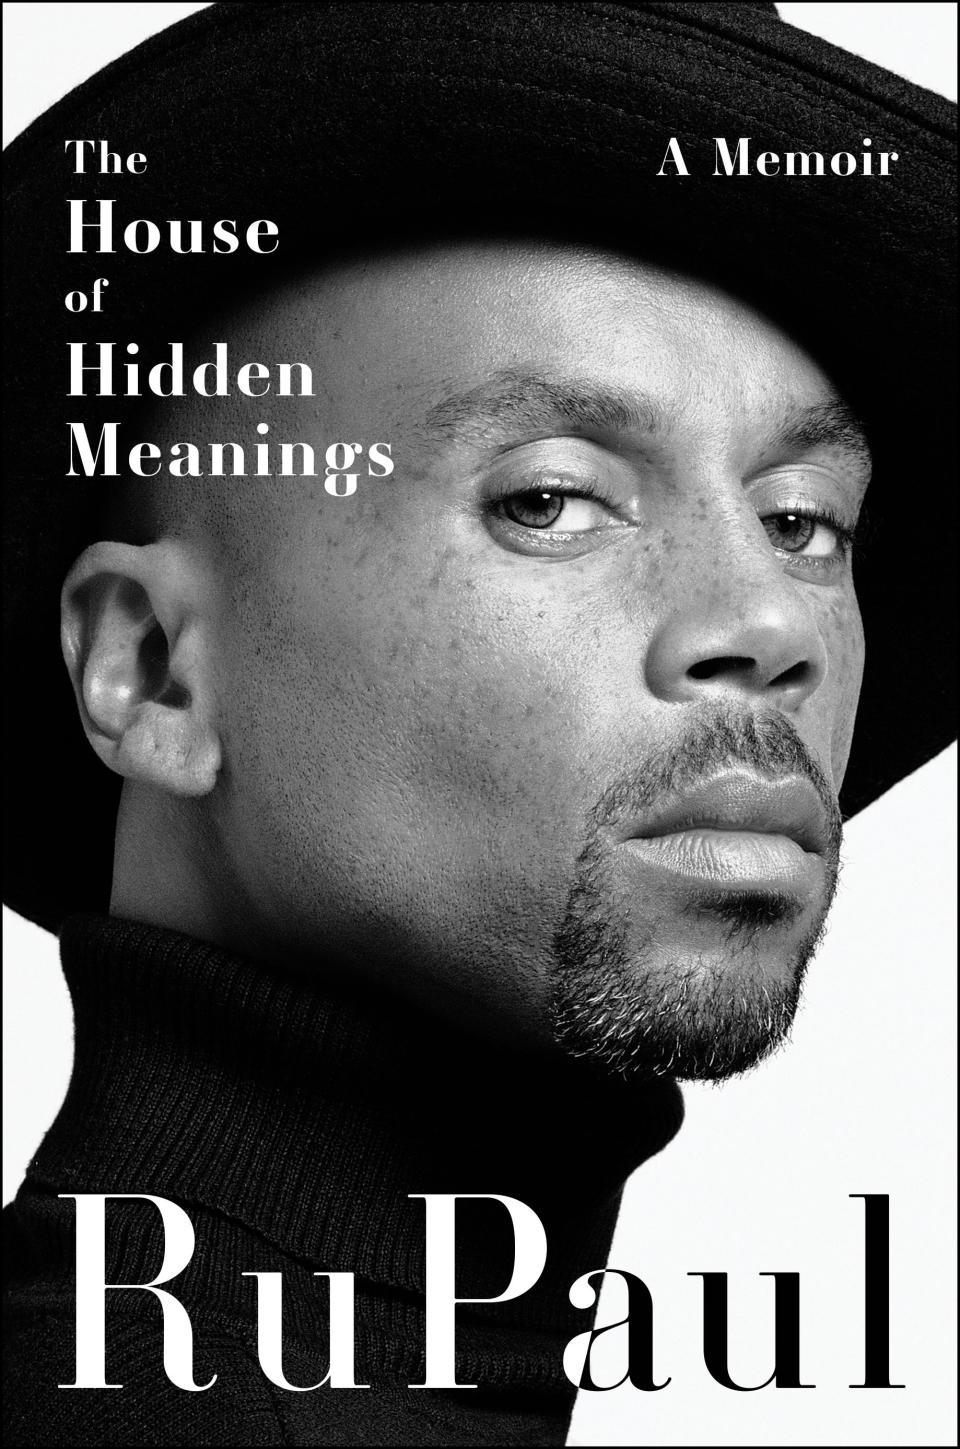 RuPaul Charles' new memoir, "The House of Hidden Meanings," is out now.